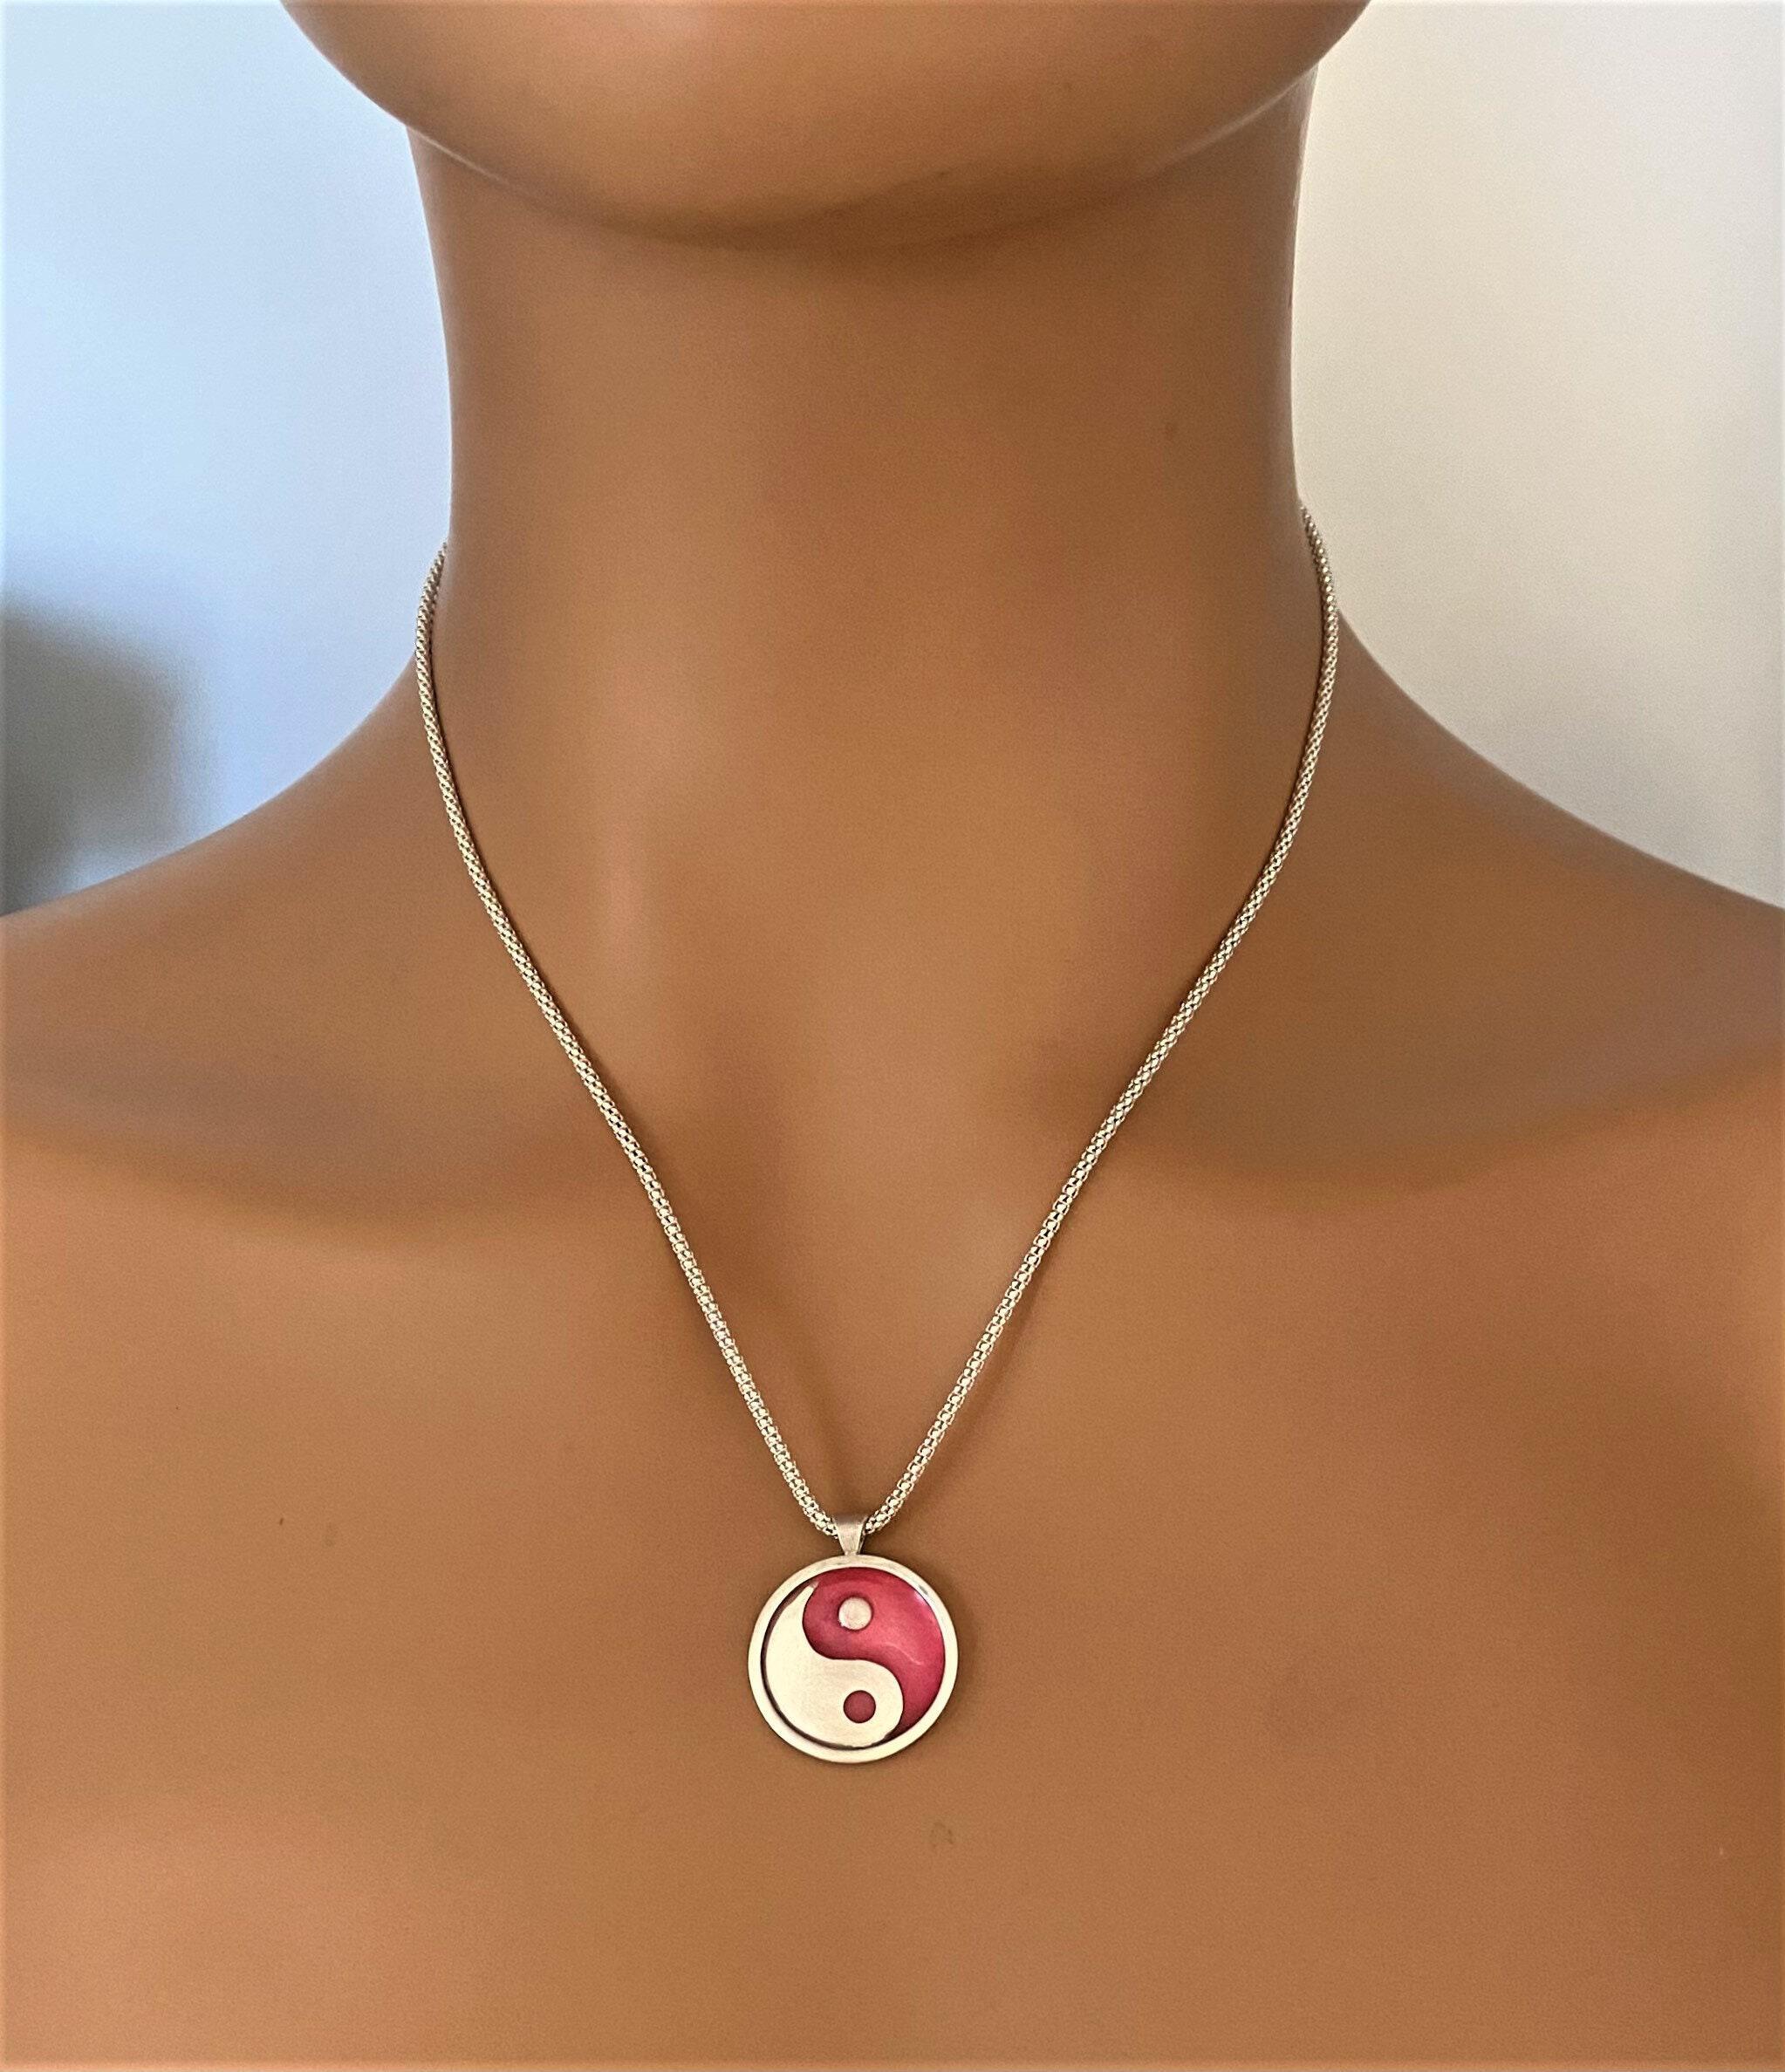 Lava Yoga Chakra 7 Chakra Pendant Natural Stone For Reiki Healing, NCE  Buddha Power, And Inspirational Jewelry For Women Perfect Gift Drop Dhnl2  From Yy_dhhome, $1.2 | DHgate.Com